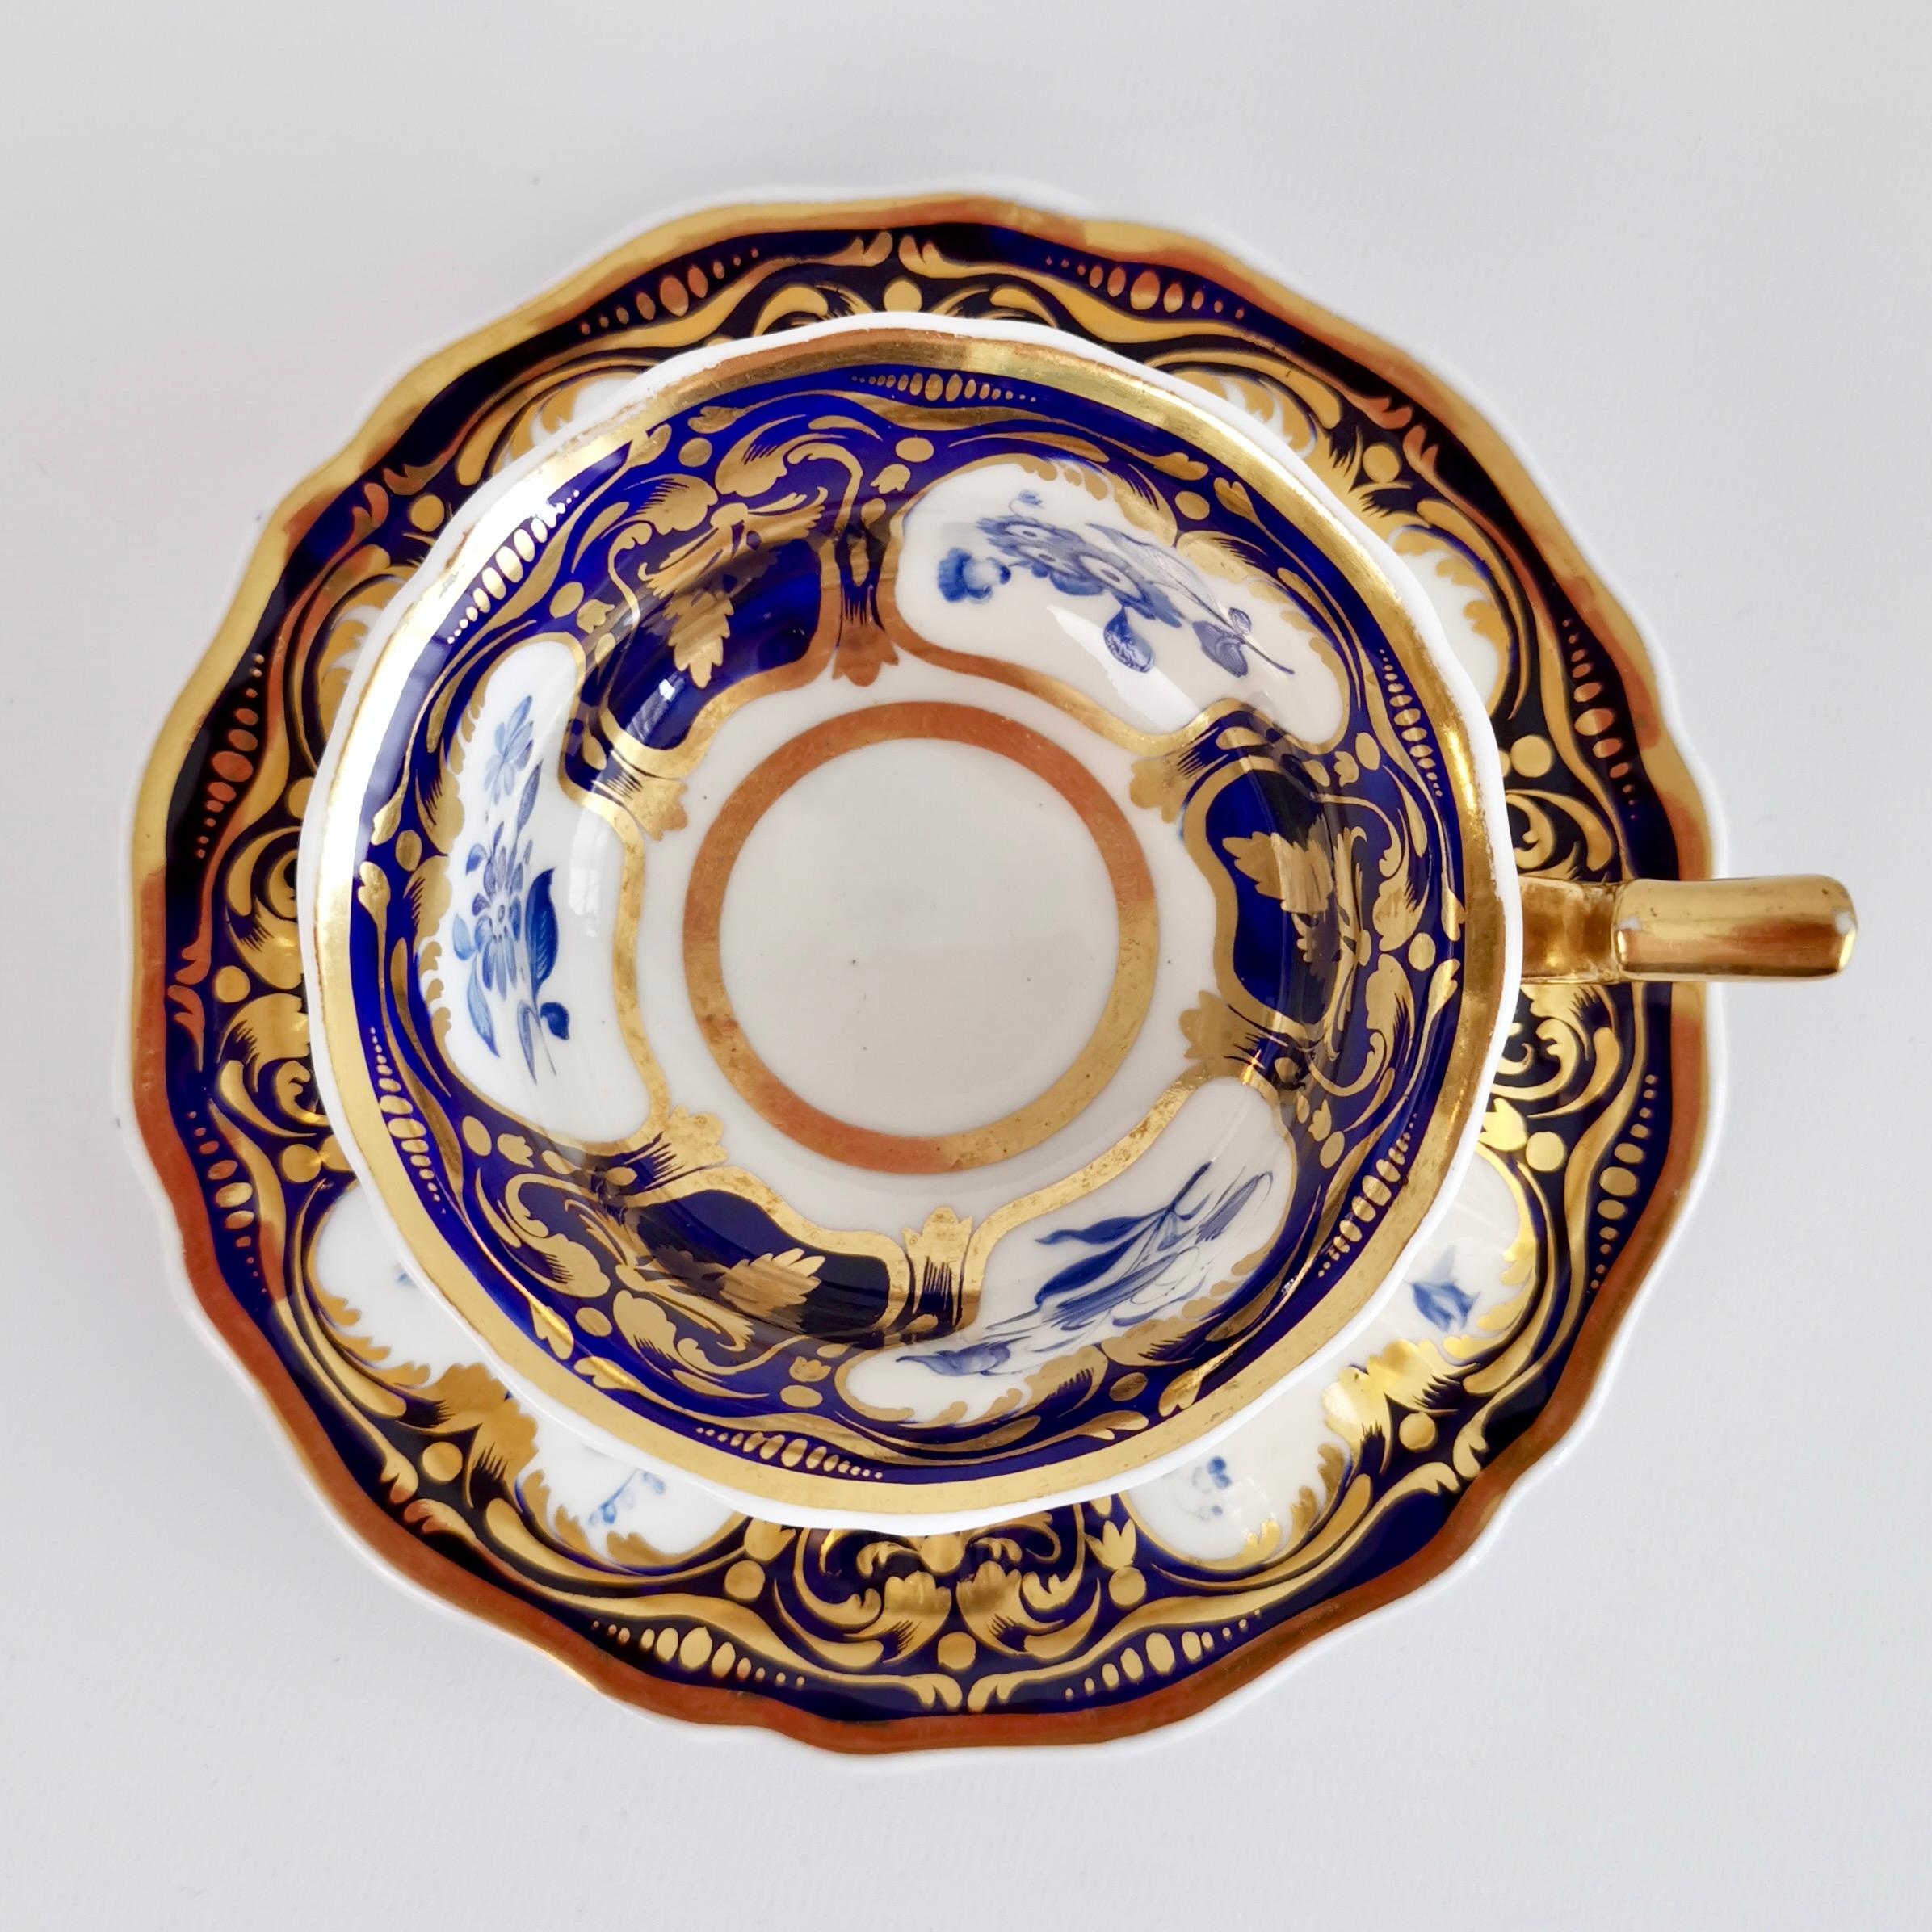 This is a beautiful teacup and saucer made around 1825 by Ridgway. It is decorated with the very popular pattern no. 2/1000: a cobalt blue ground with rich gilding and monochrome blue flowers in reserves. The shape is typical for its time and